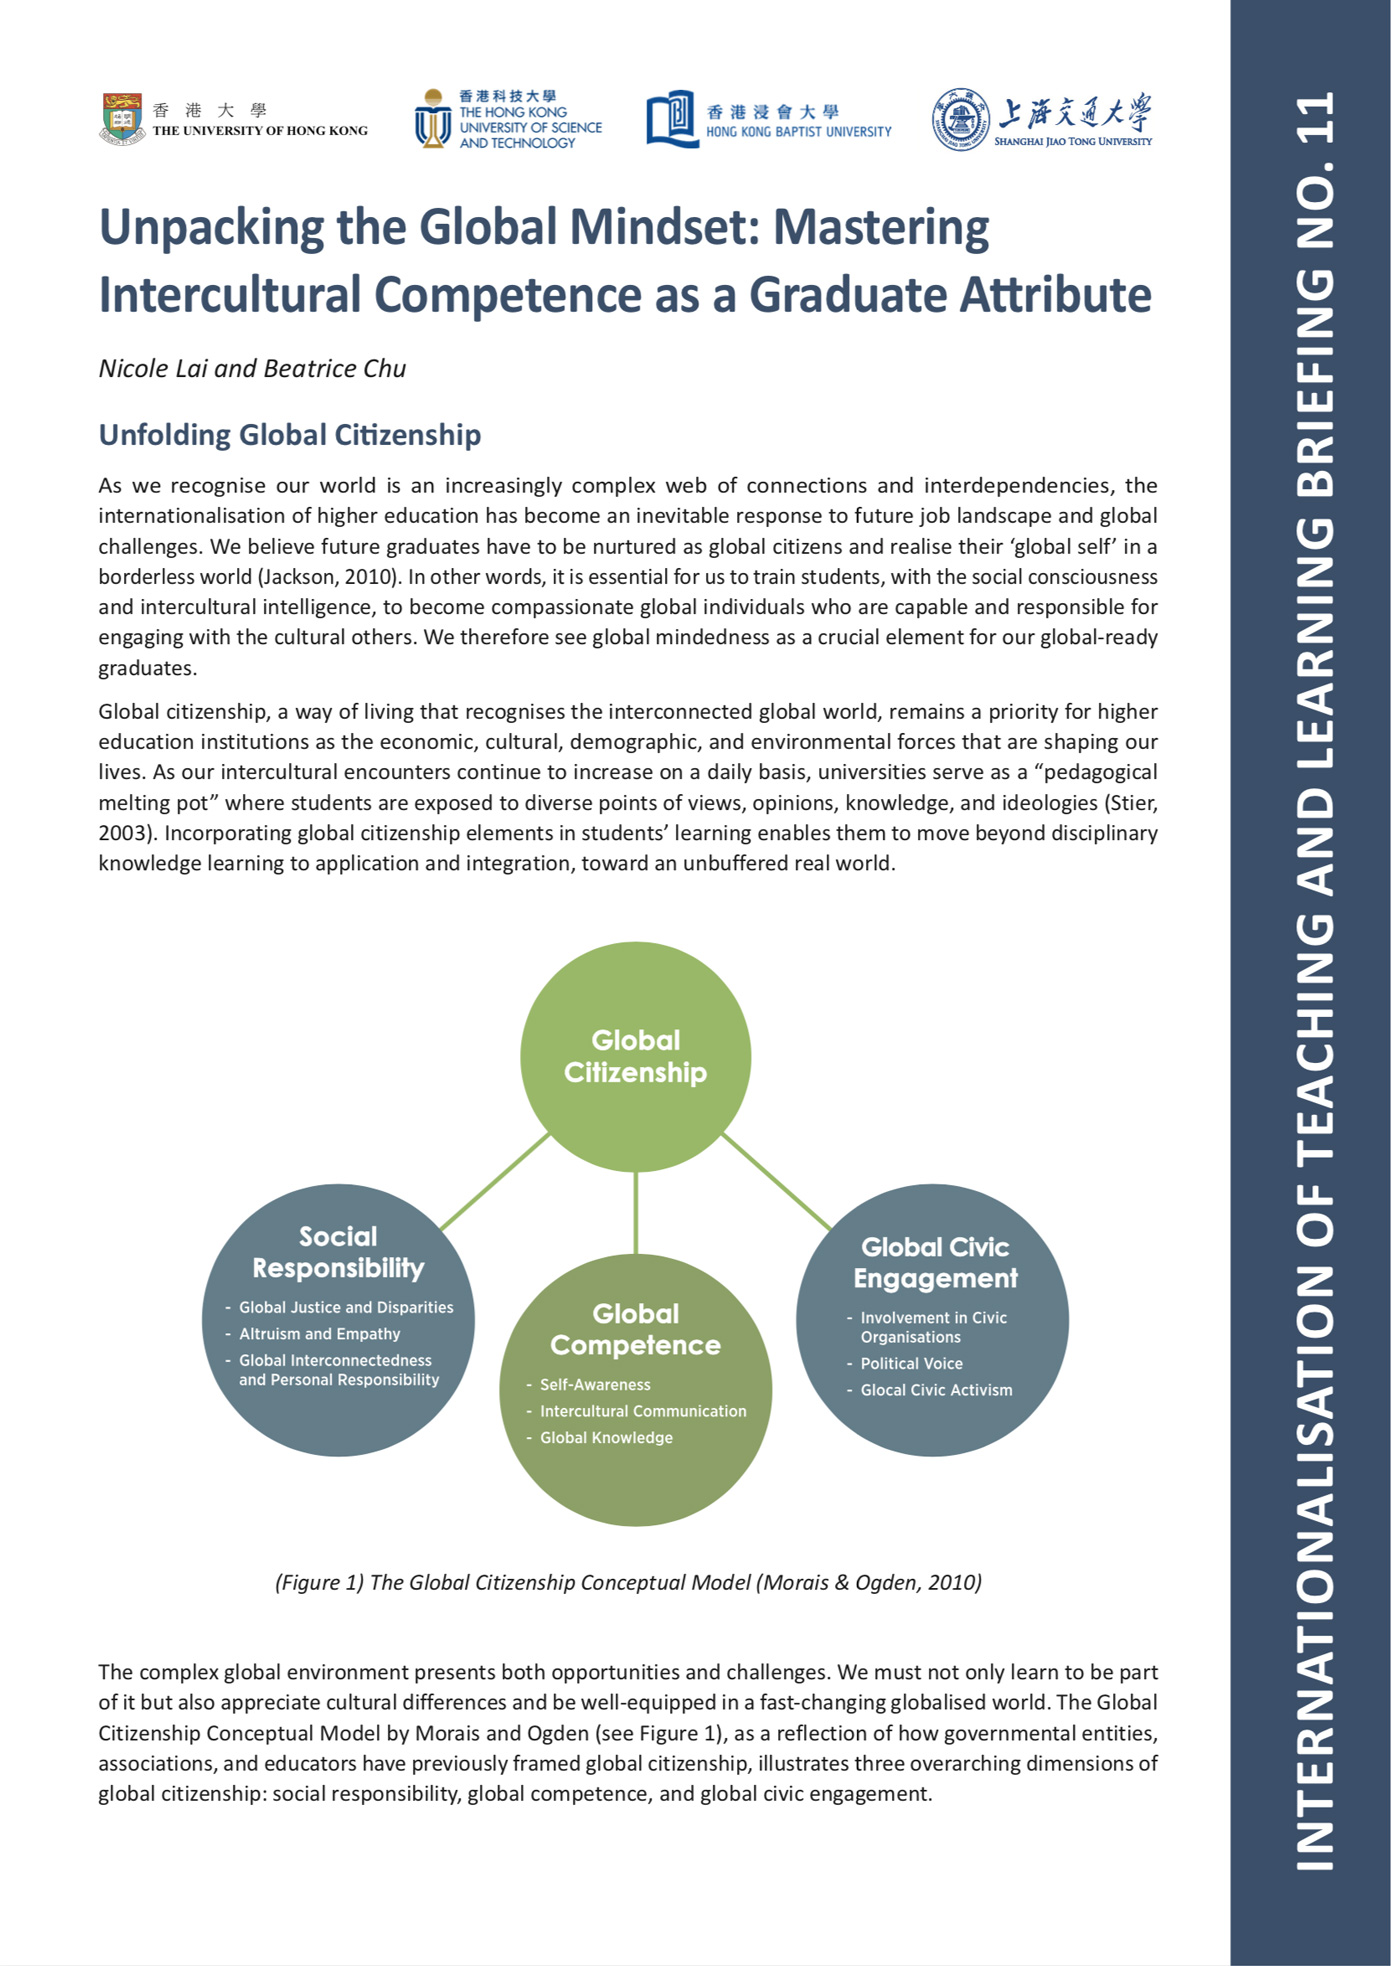 11. Unpacking the Global Mindset: Mastering Intercultural Competence as a Graduate Attribute